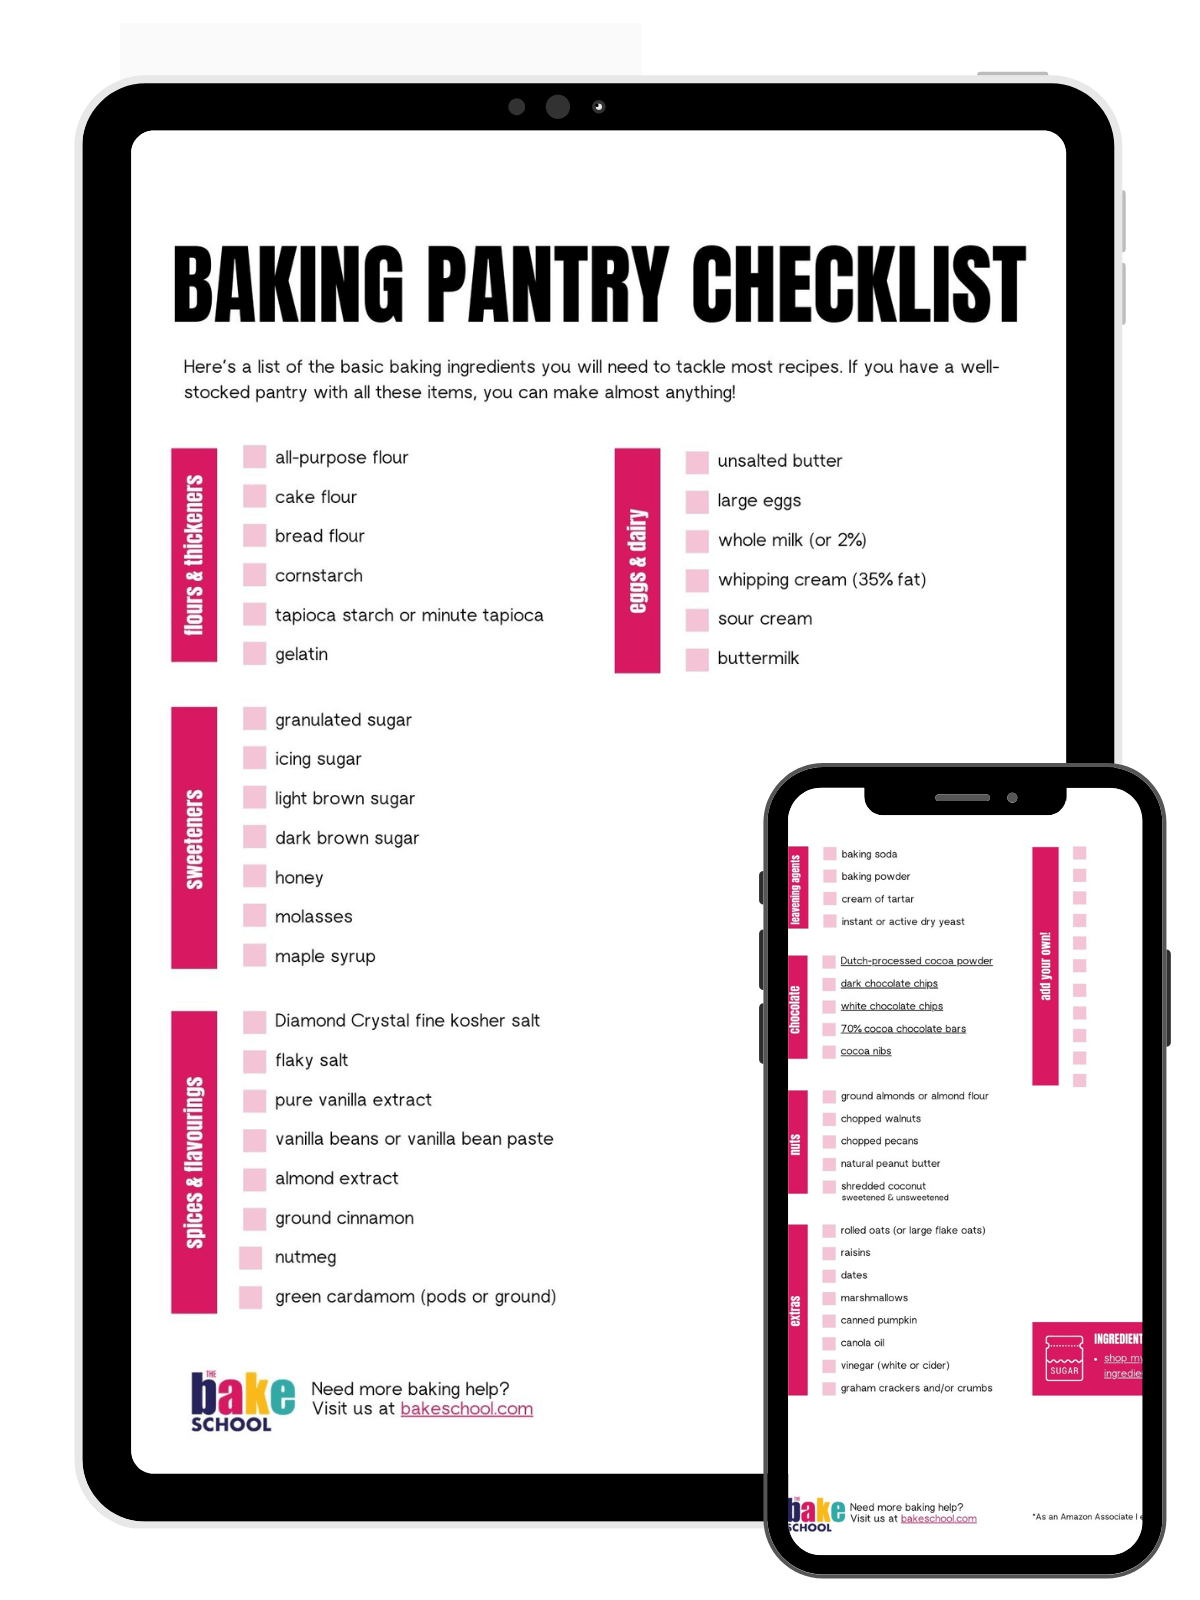 Baking pantry checklist displayed on a tablet and smartphone.